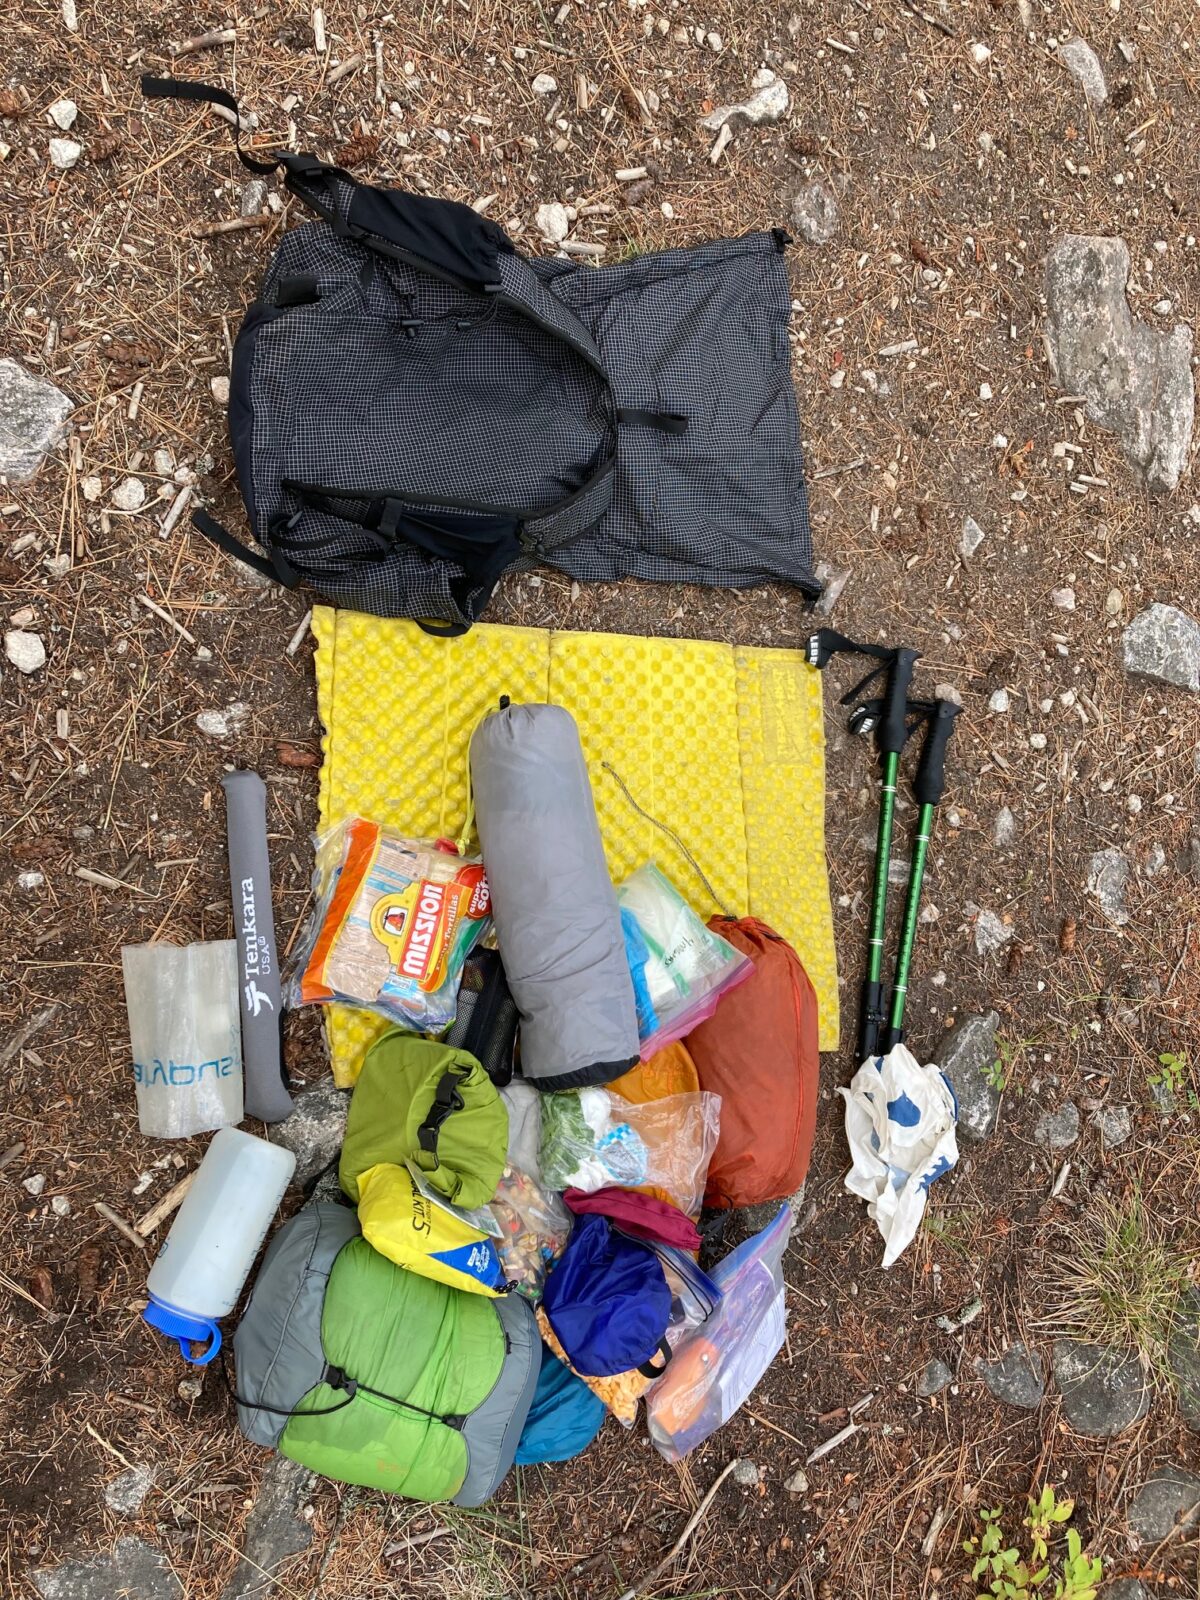 Backpacking Gear List: What to Bring on a Backpacking Trip